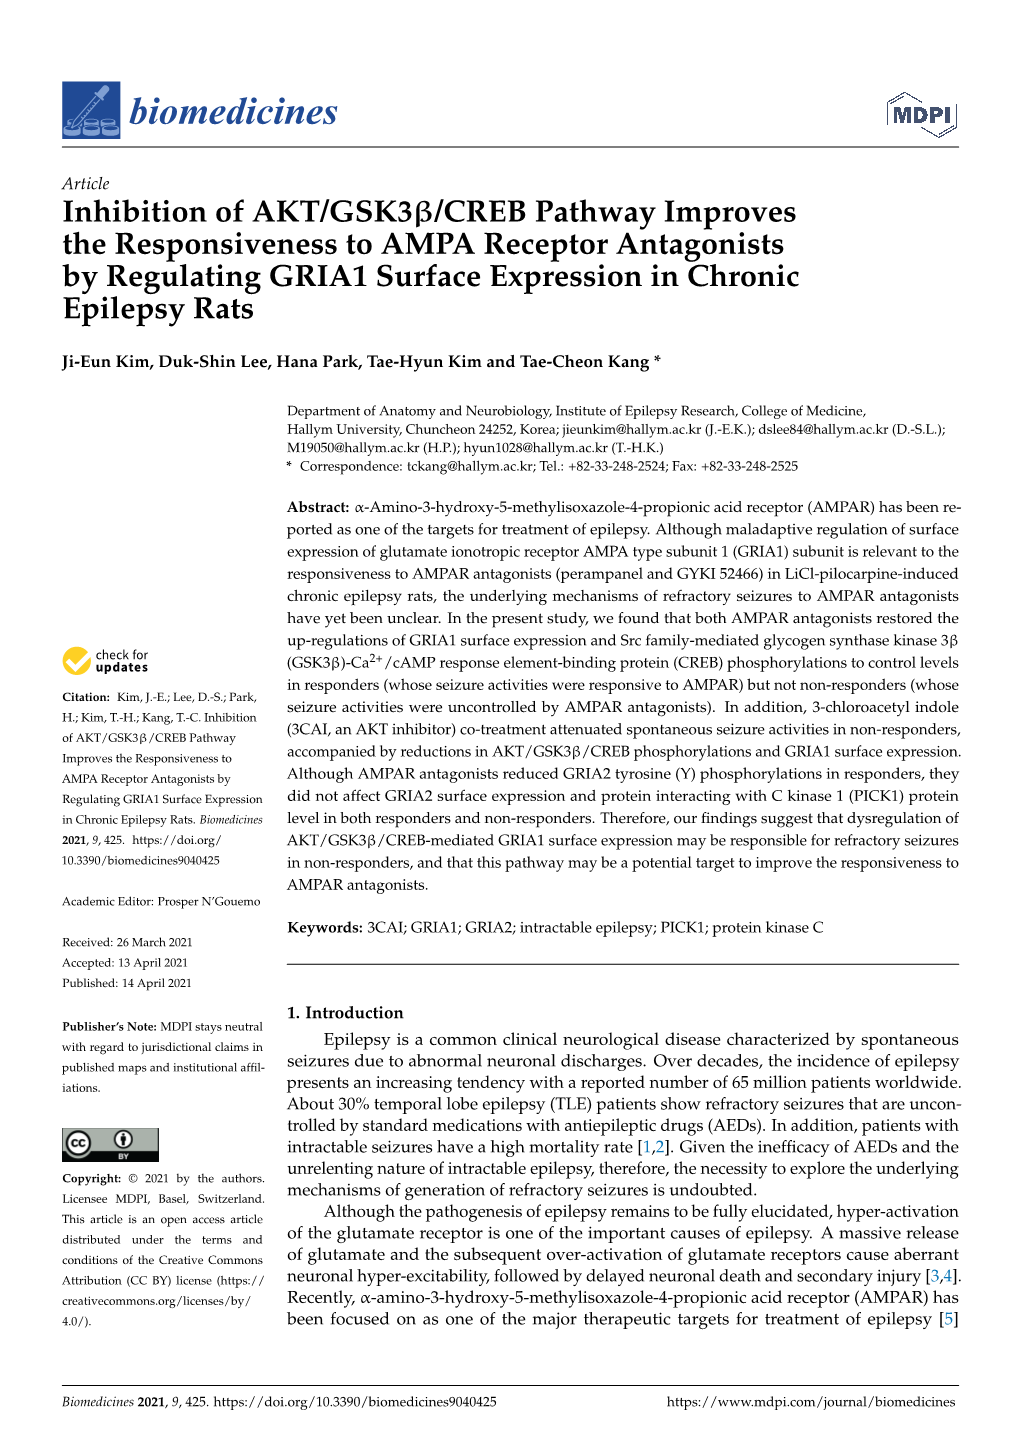 Inhibition of AKT/Gsk3β/CREB Pathway Improves the Responsiveness to AMPA Receptor Antagonists by Regulating GRIA1 Surface Expression in Chronic Epilepsy Rats